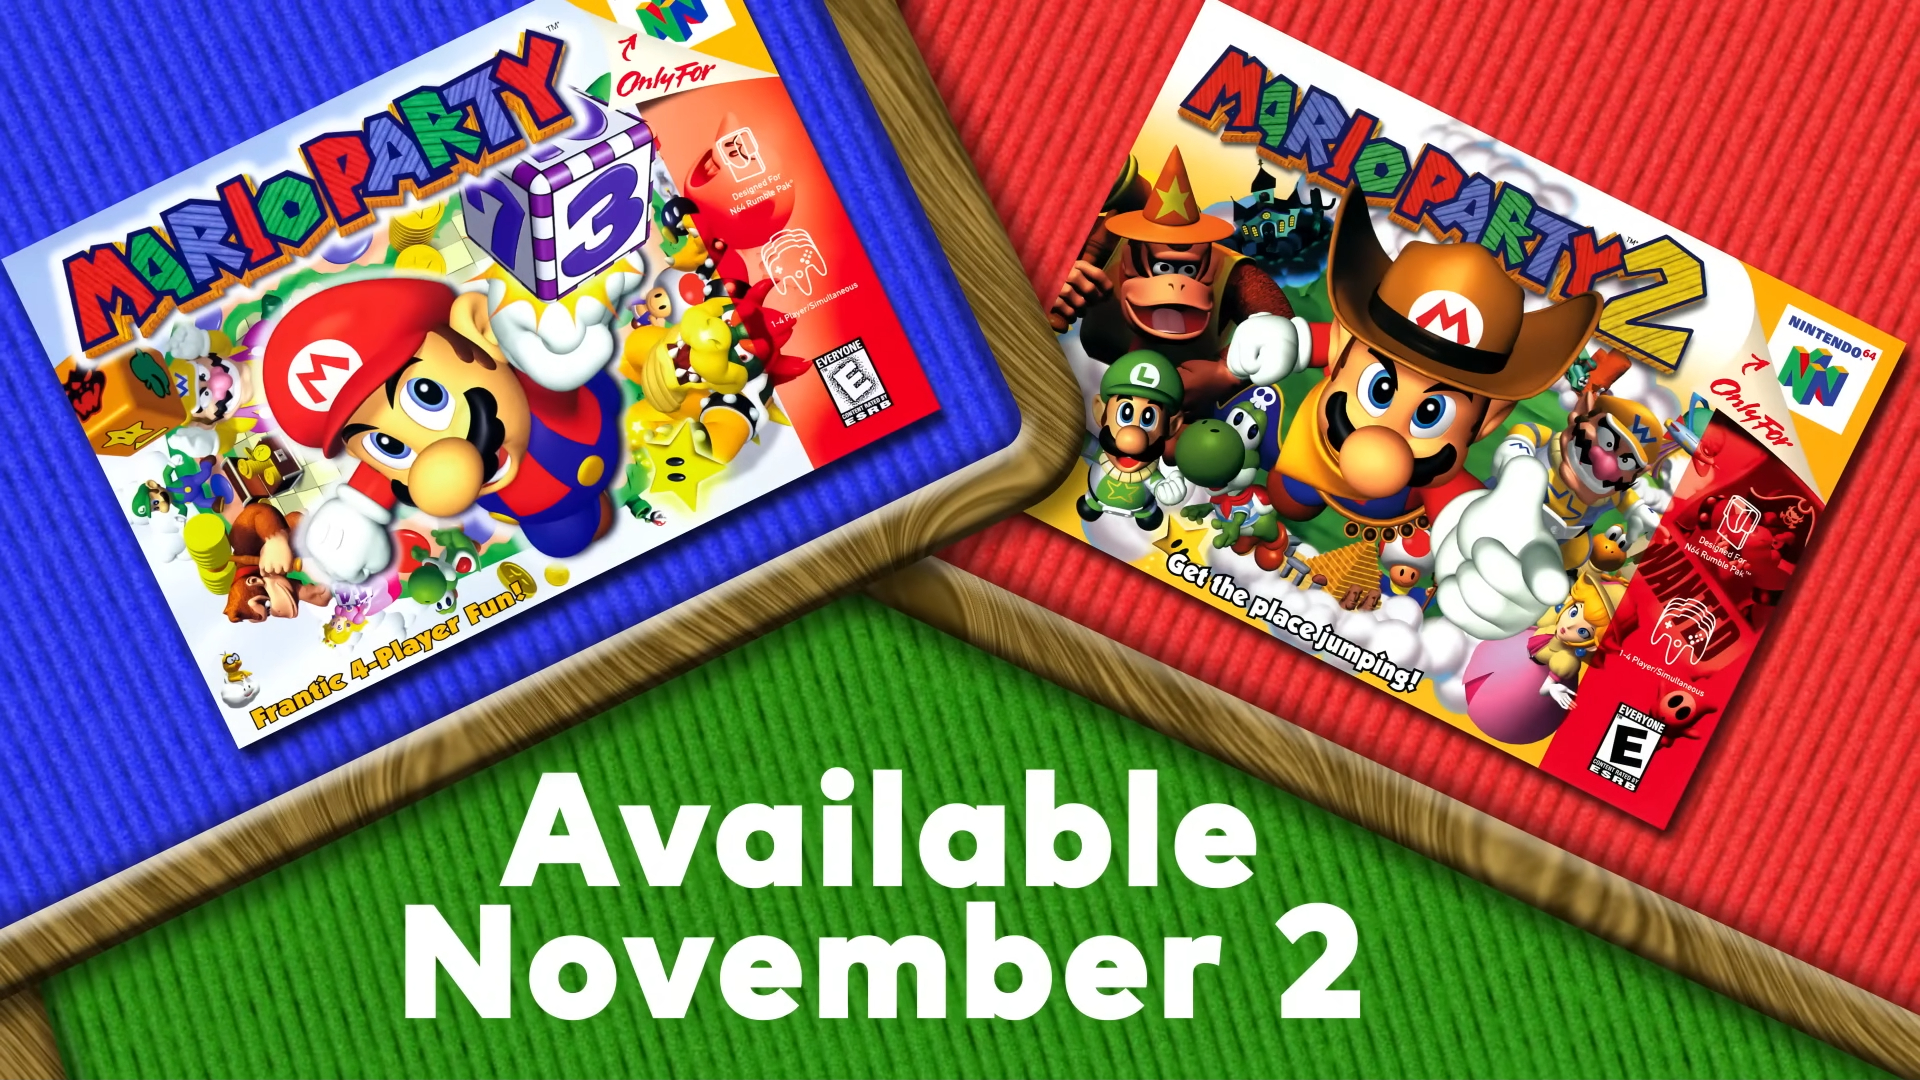 Mario Party 1 + 2 are coming to Nintendo Switch Online